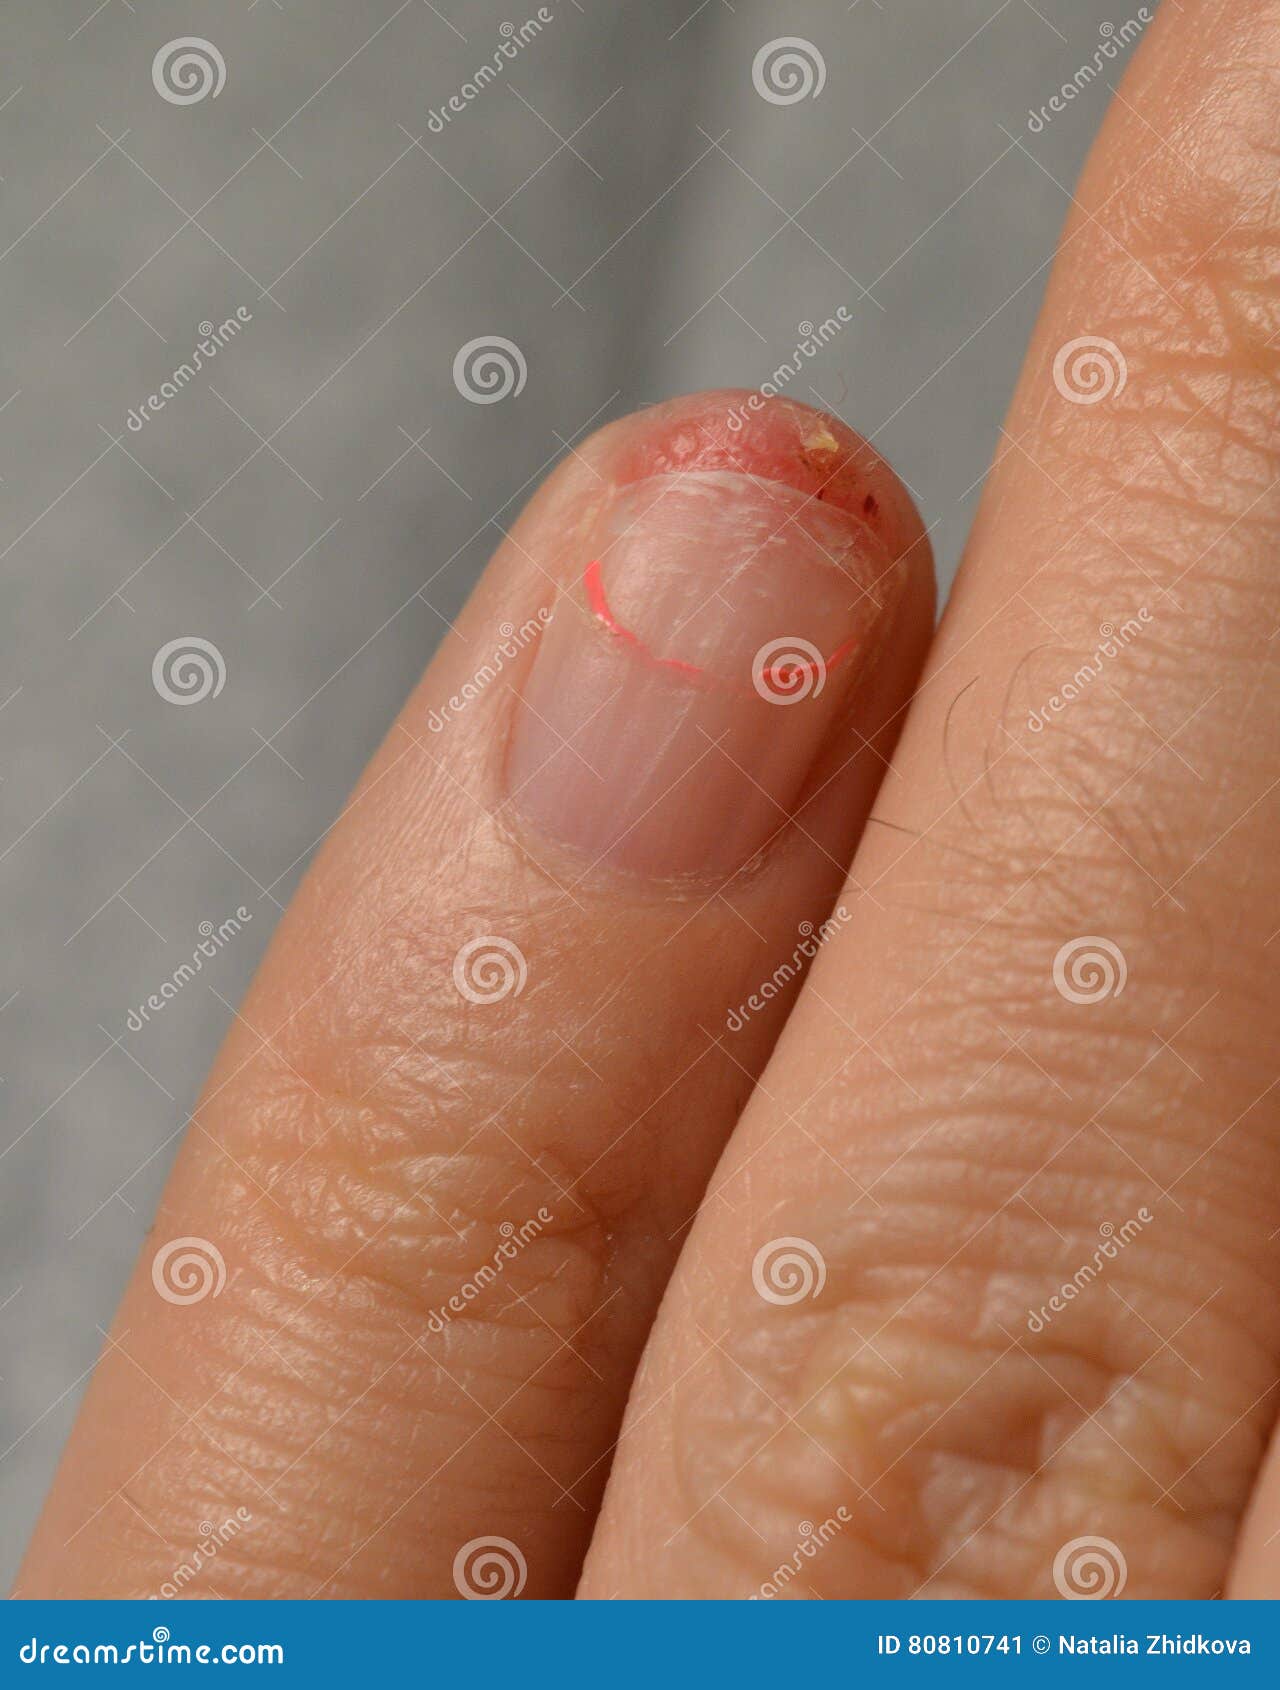 Too Grown Nail Gel-coated Break Off and Injure the Skin Under the Nail Plate  Stock Image - Image of break, fixation: 80810741